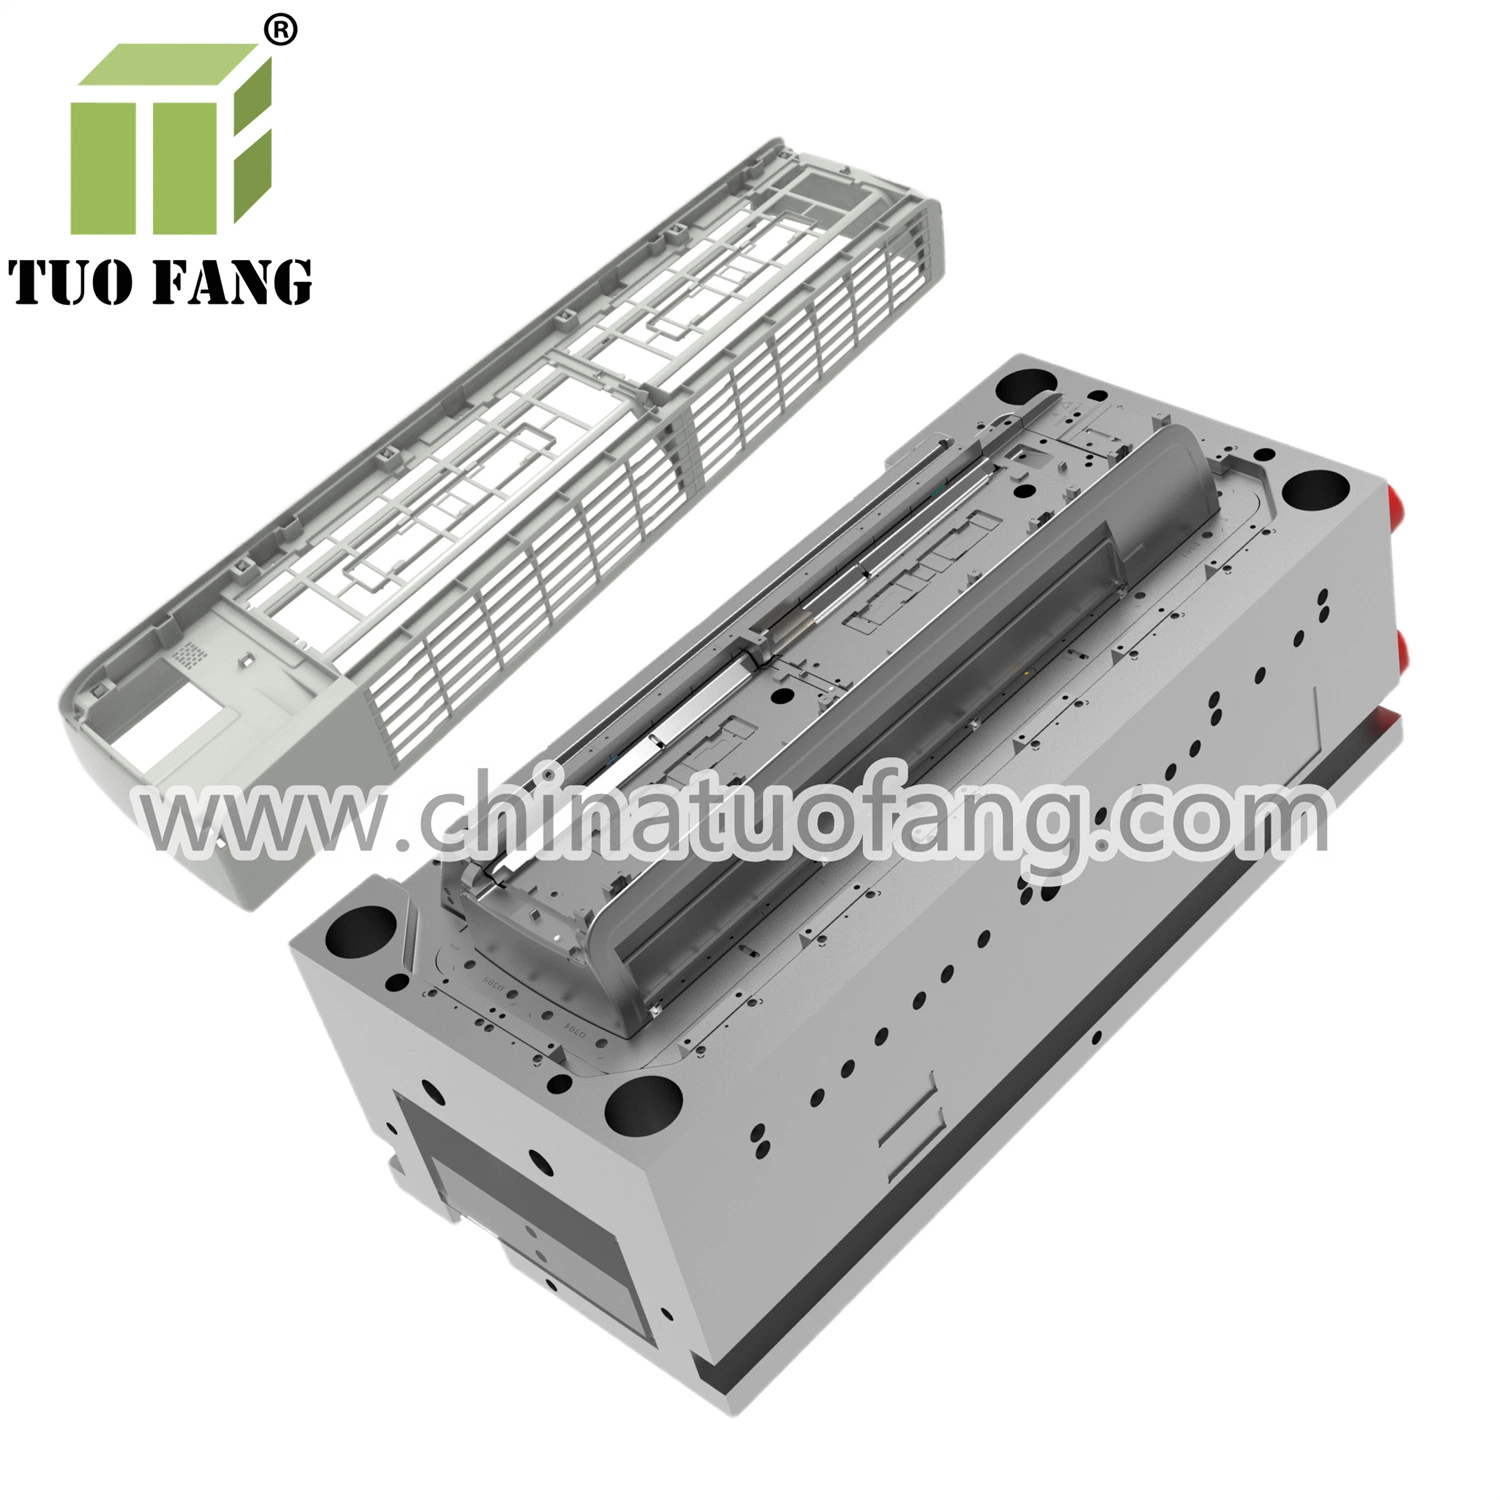 Home Appliance Plastic Part Mould Air Conditioner Shell Enclosure Injection Moulding